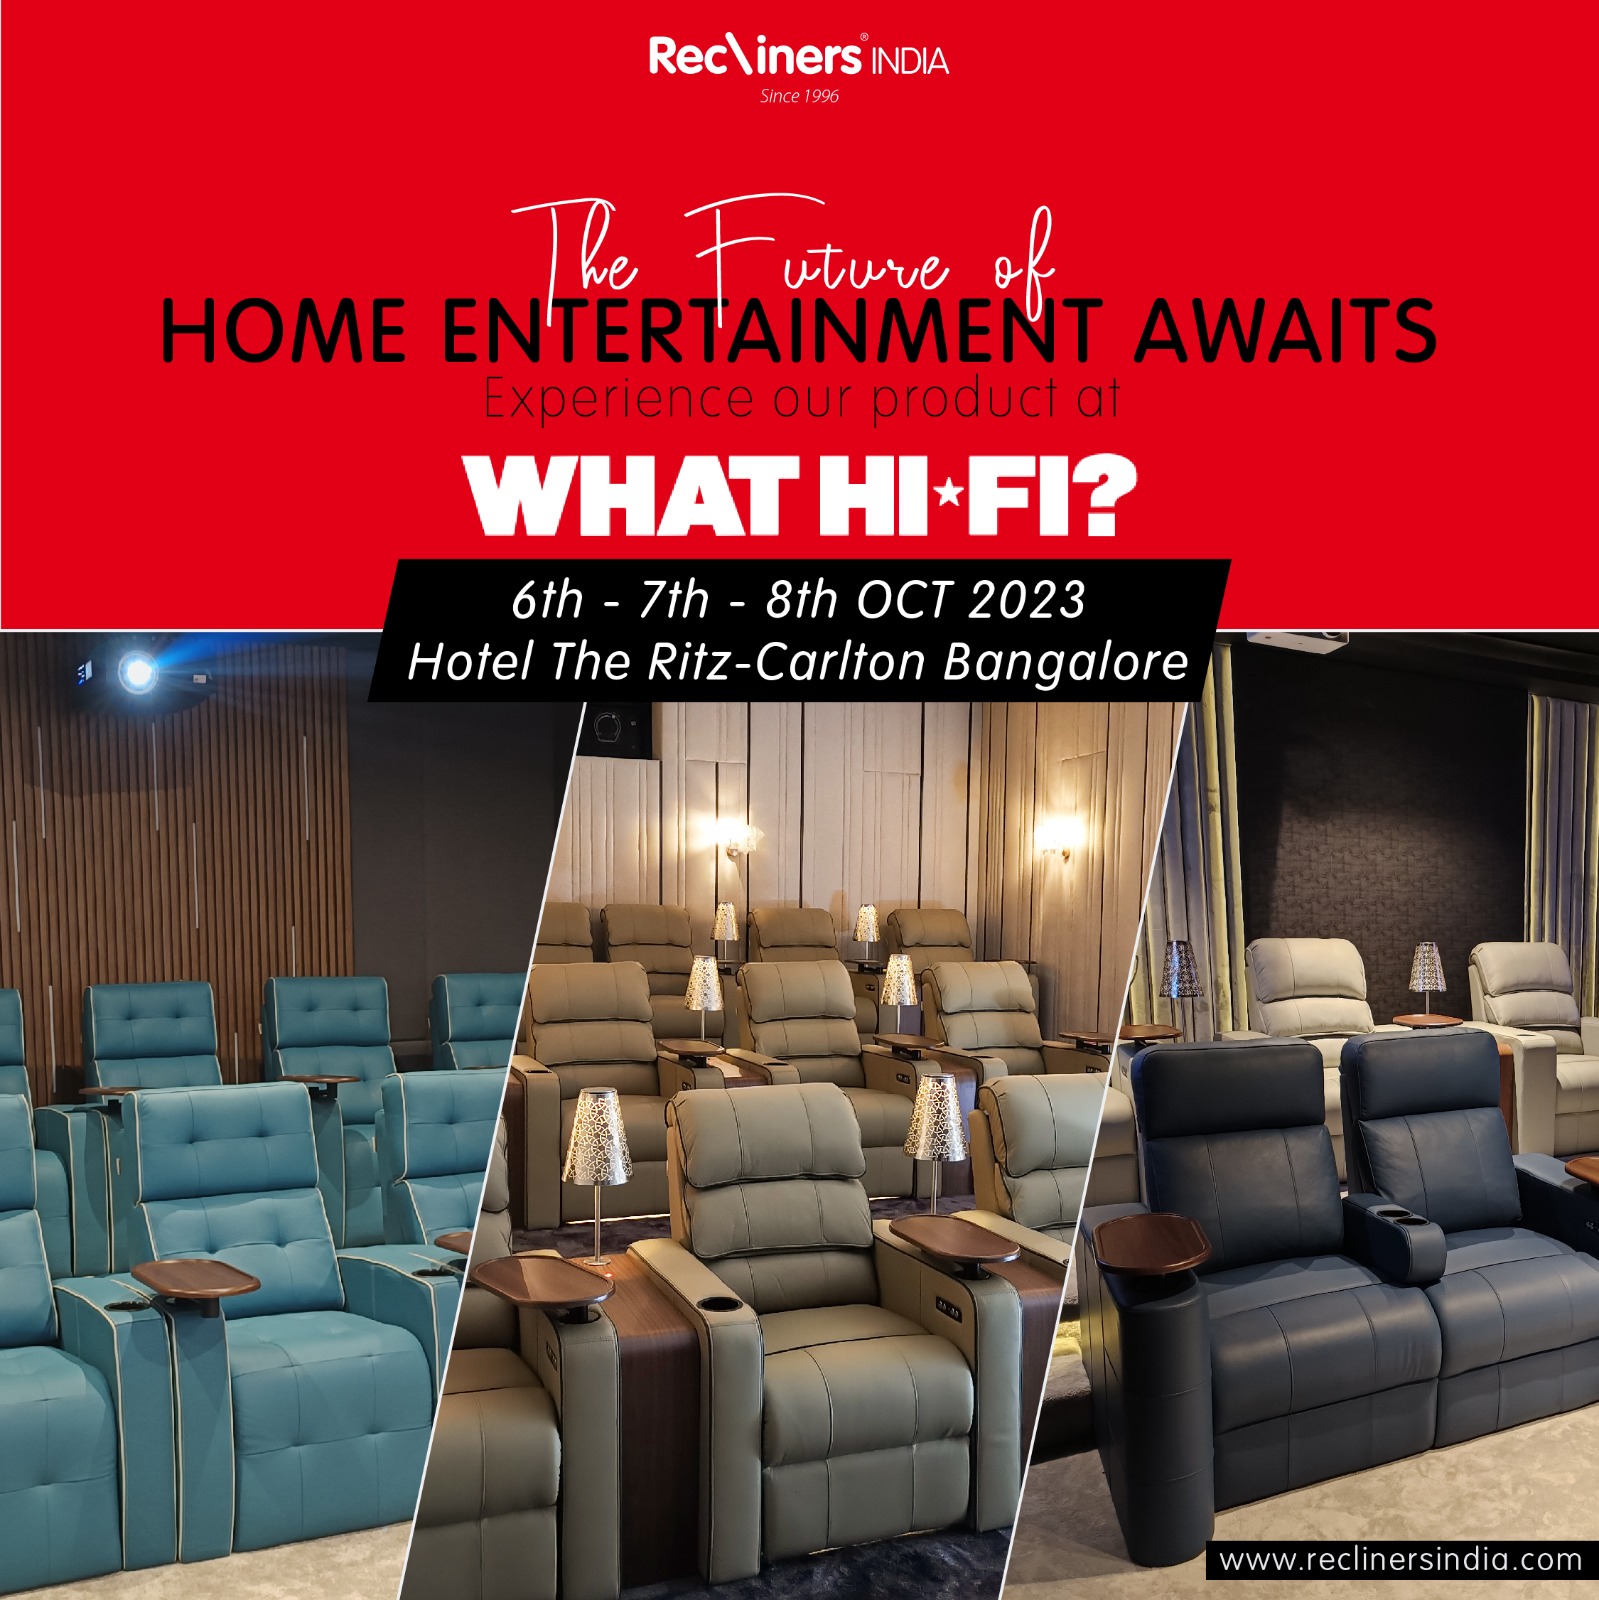 Recliners India Upcoming Events